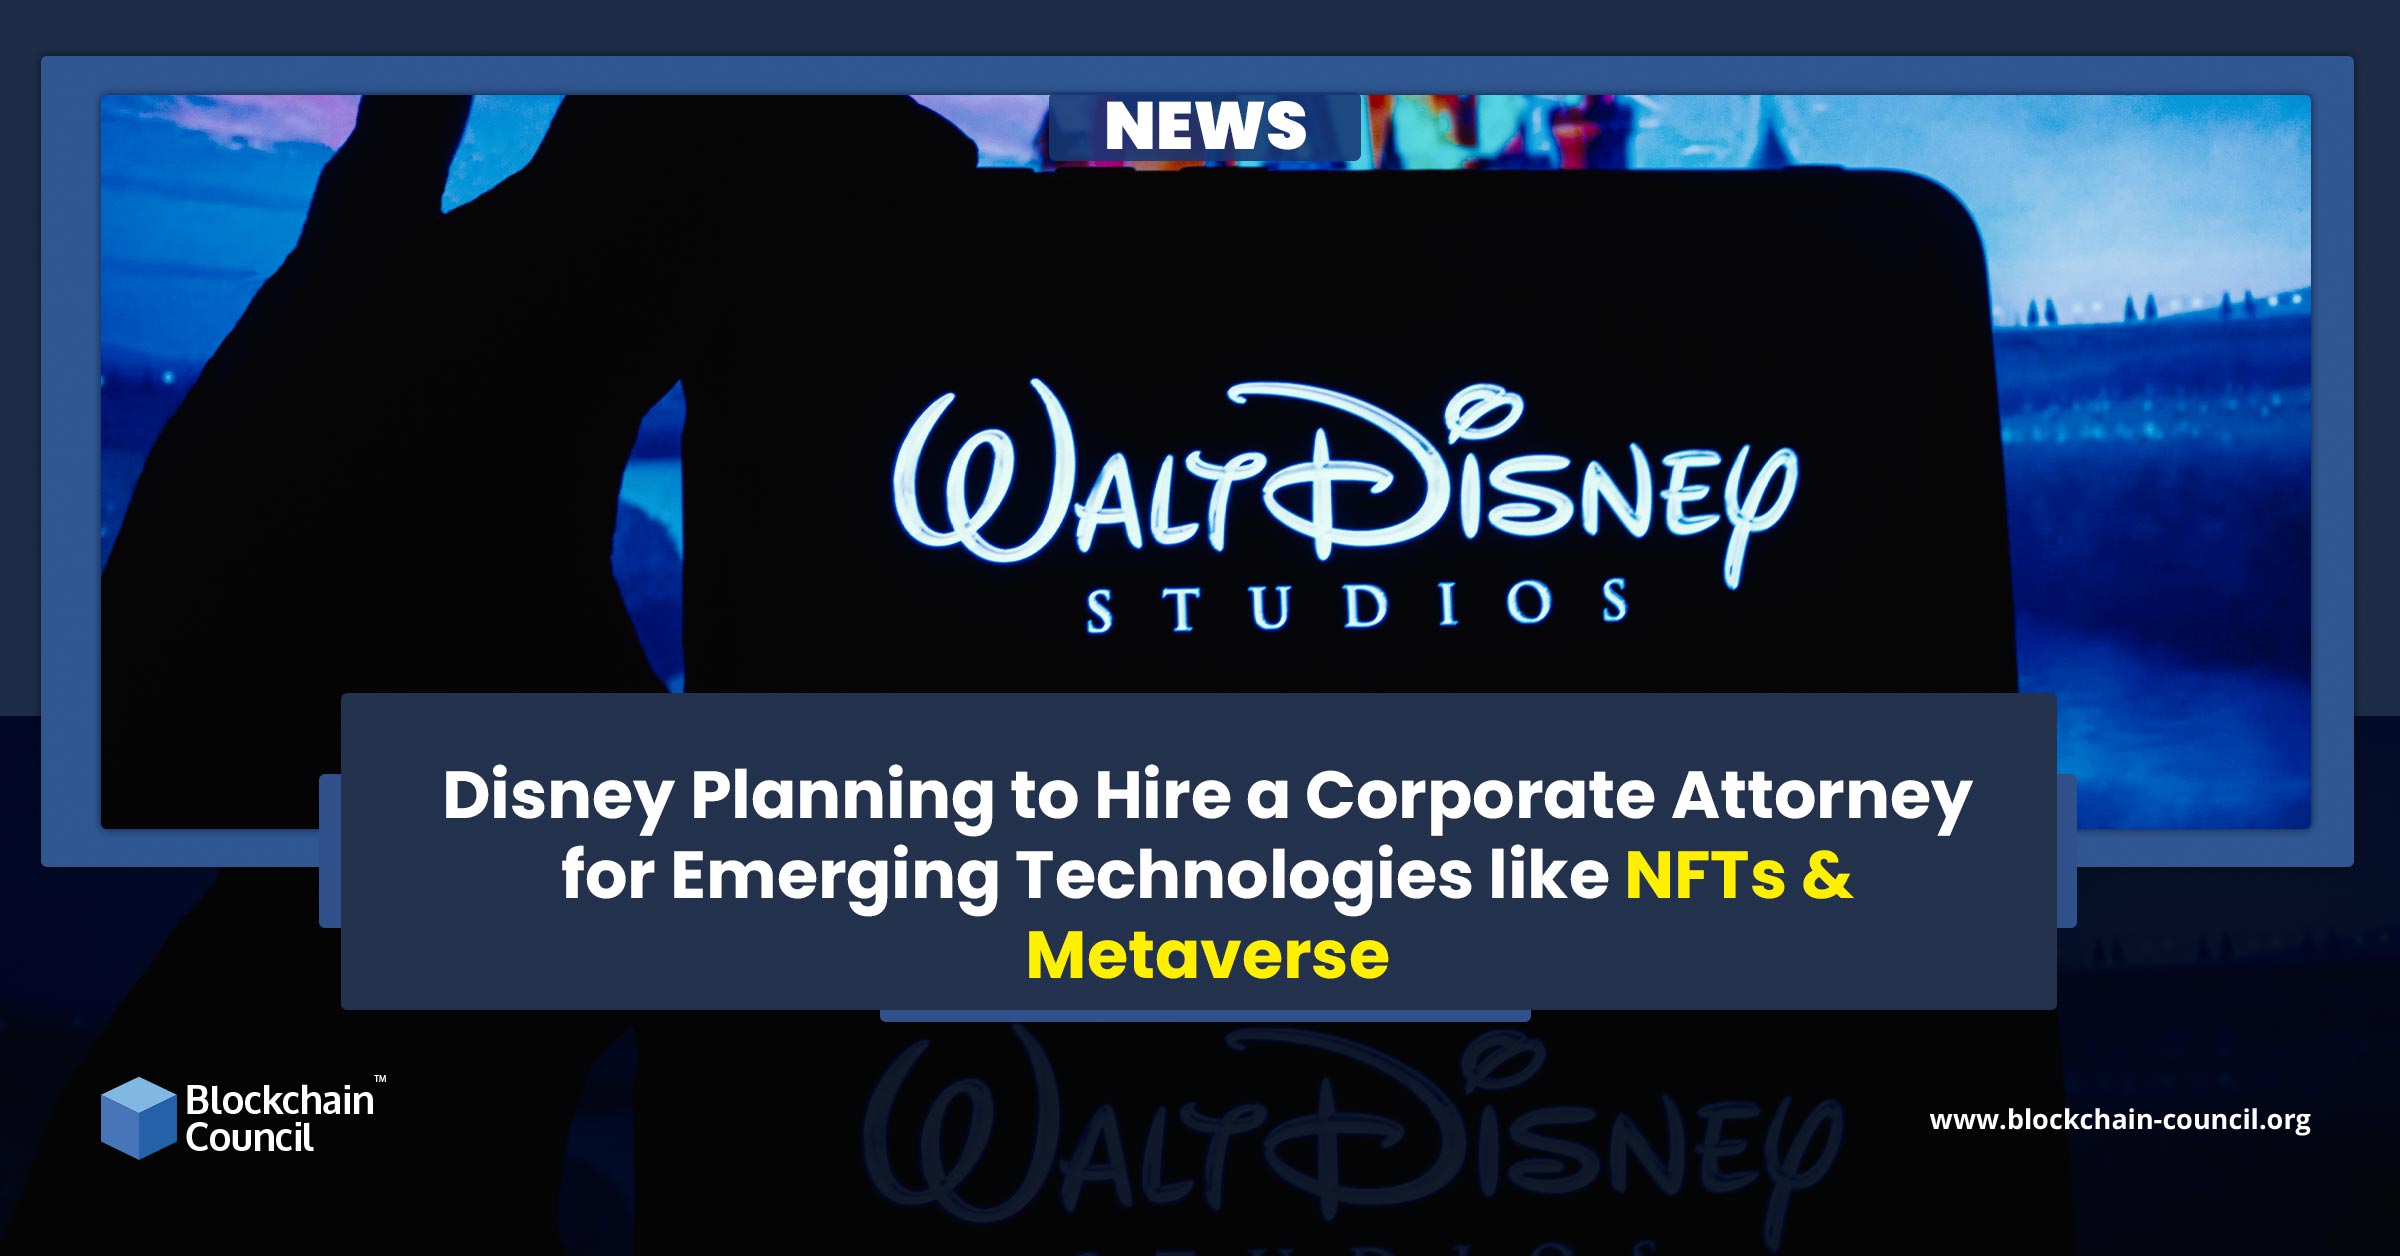 Disney Planning to Hire a Corporate Attorney for Emerging Technologies like NFTs & Metaverse